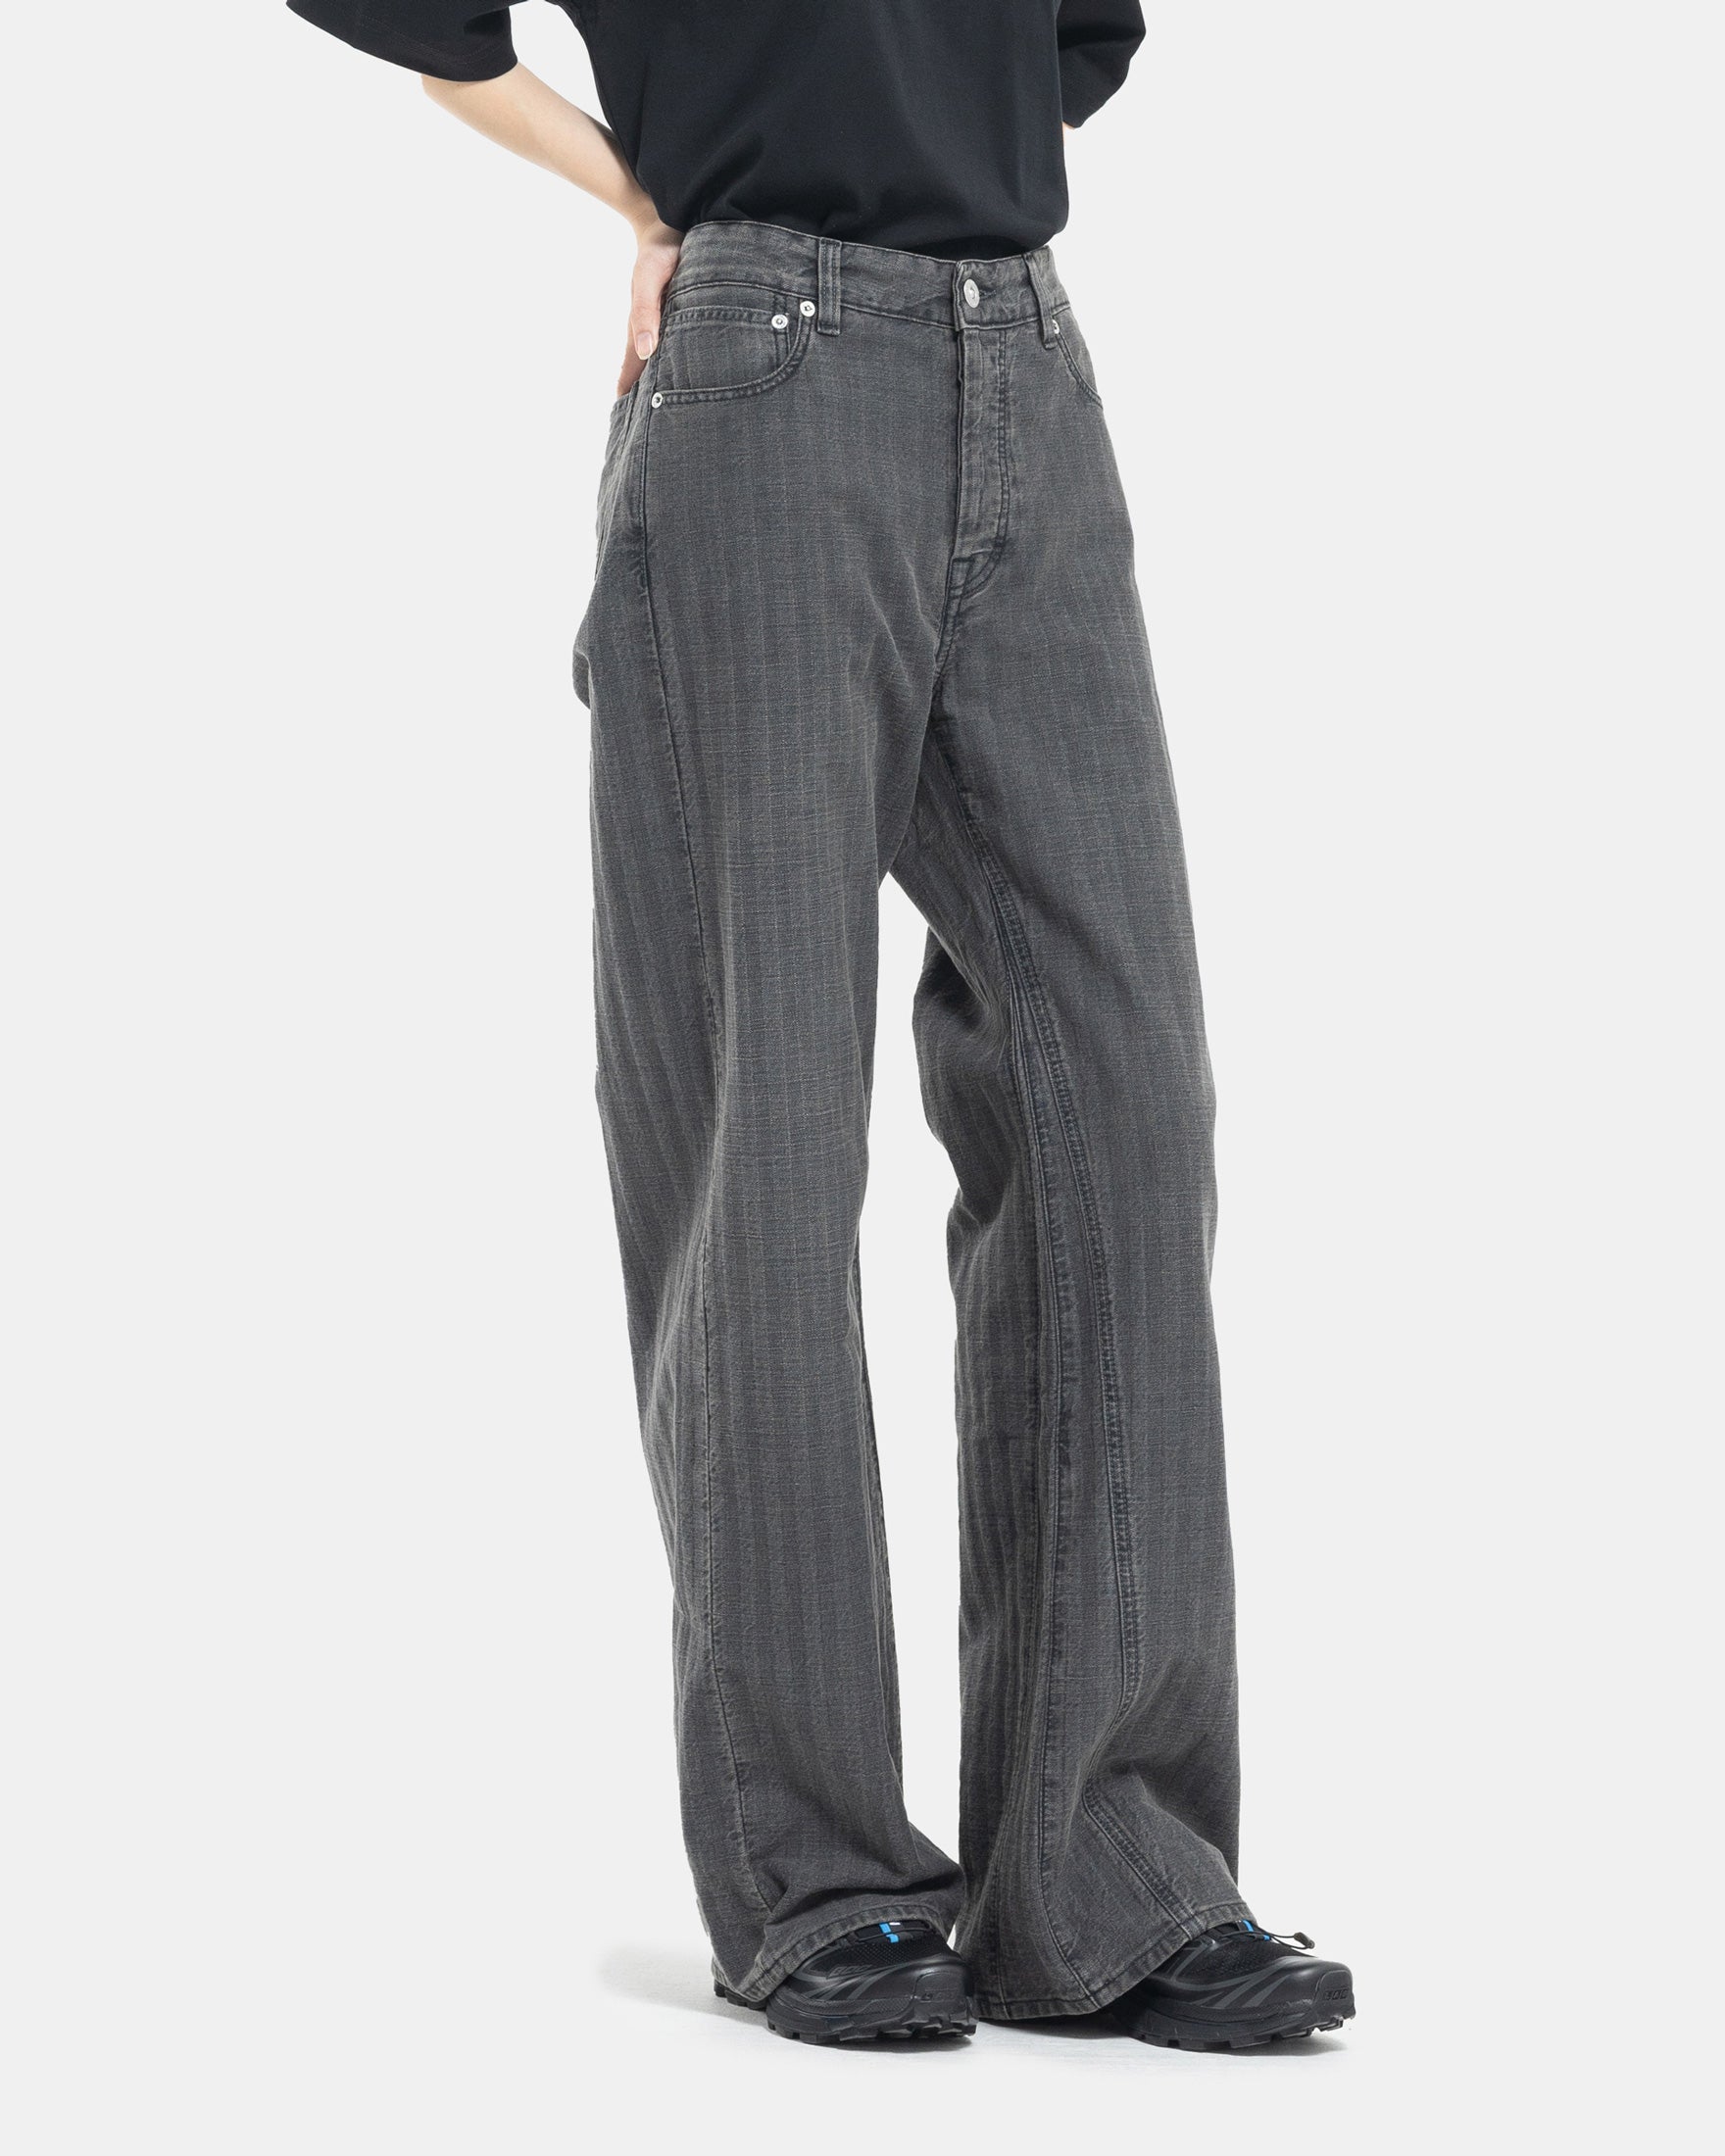 Grey Stripe Jeans from Our Legacy on a white background